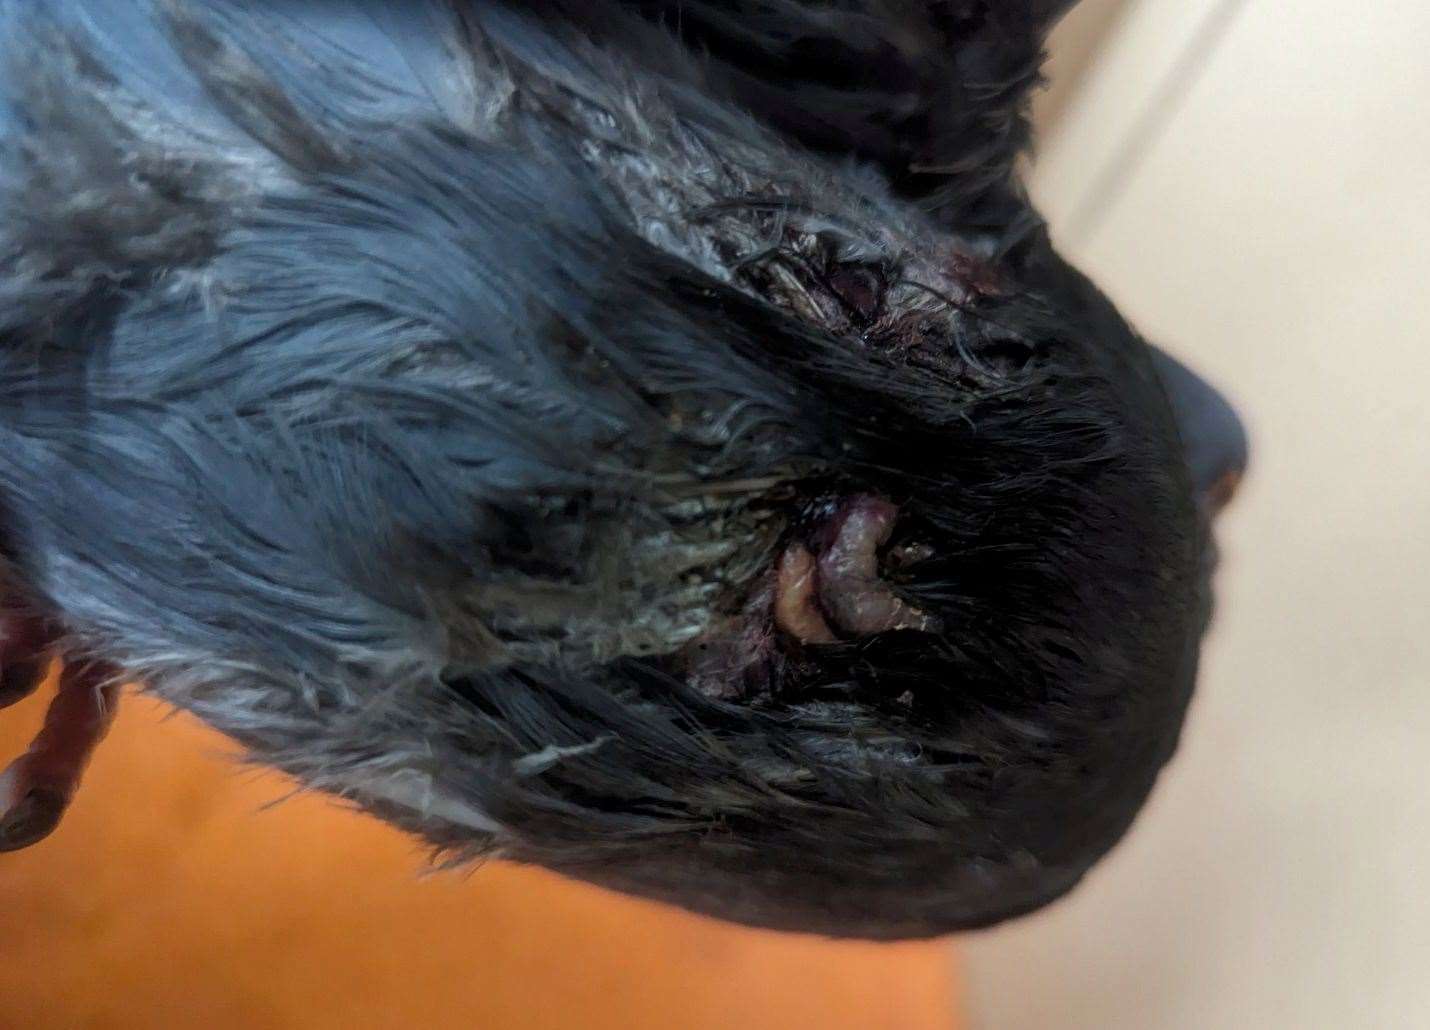 The pigeon was fatally injured. Picture: RSPCA